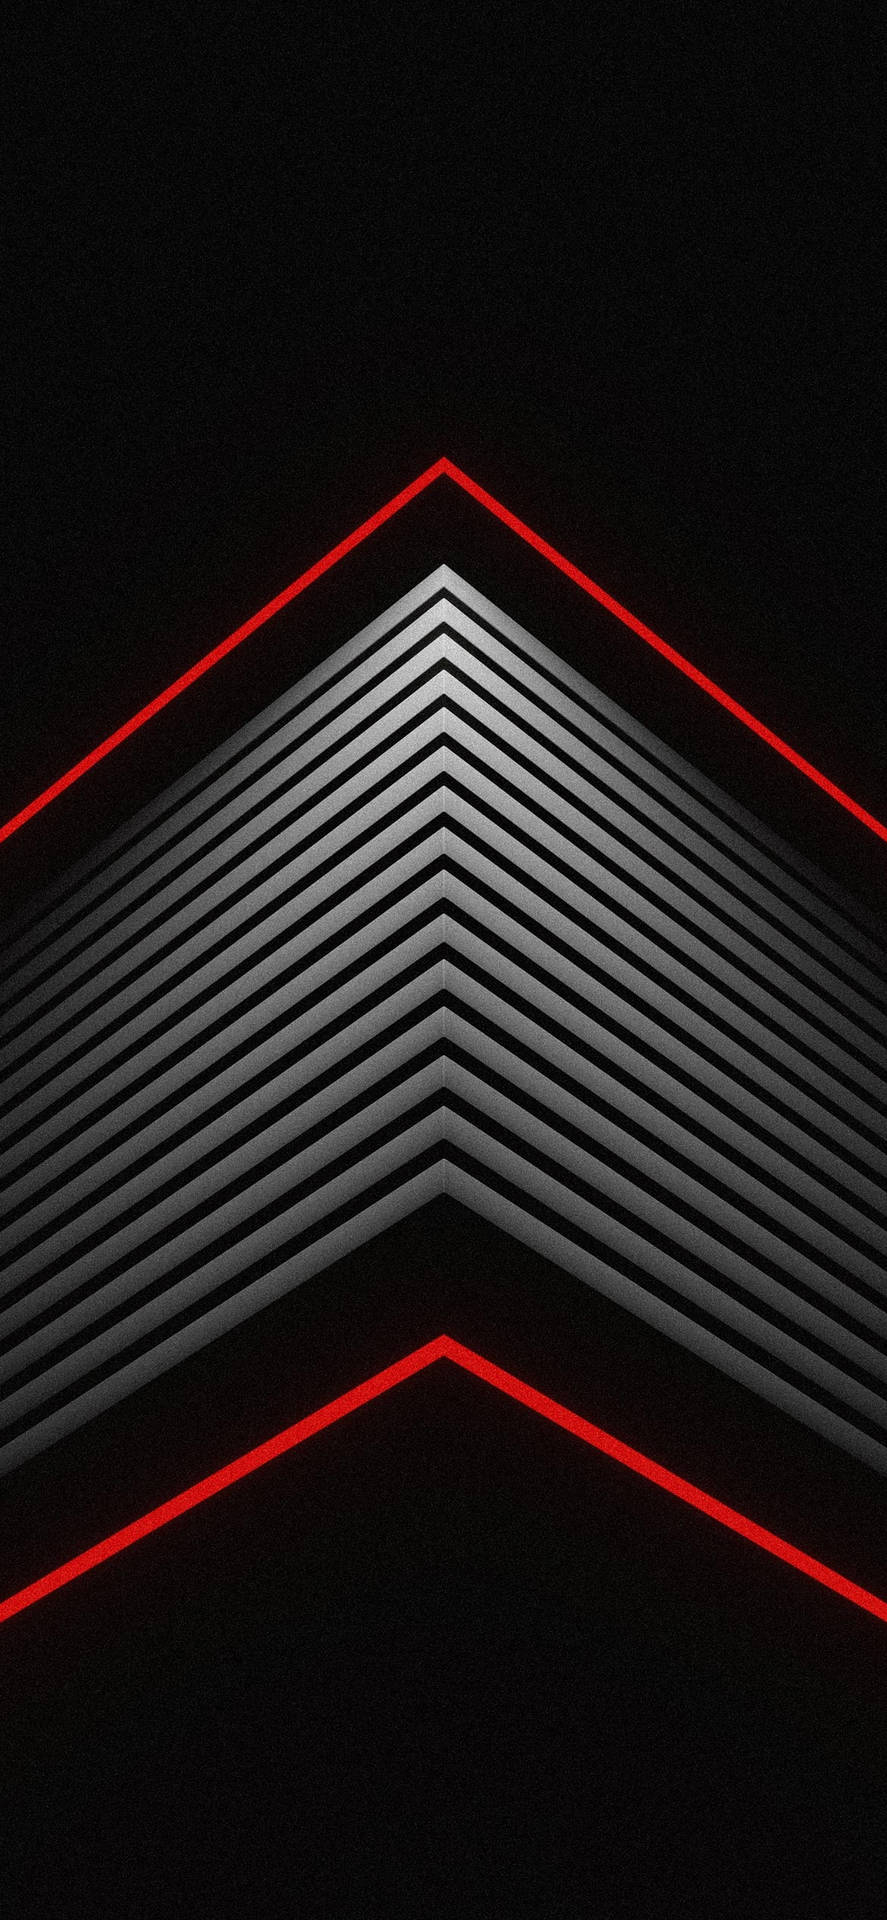 Red And White Patterns Iphone 2021 Wallpaper